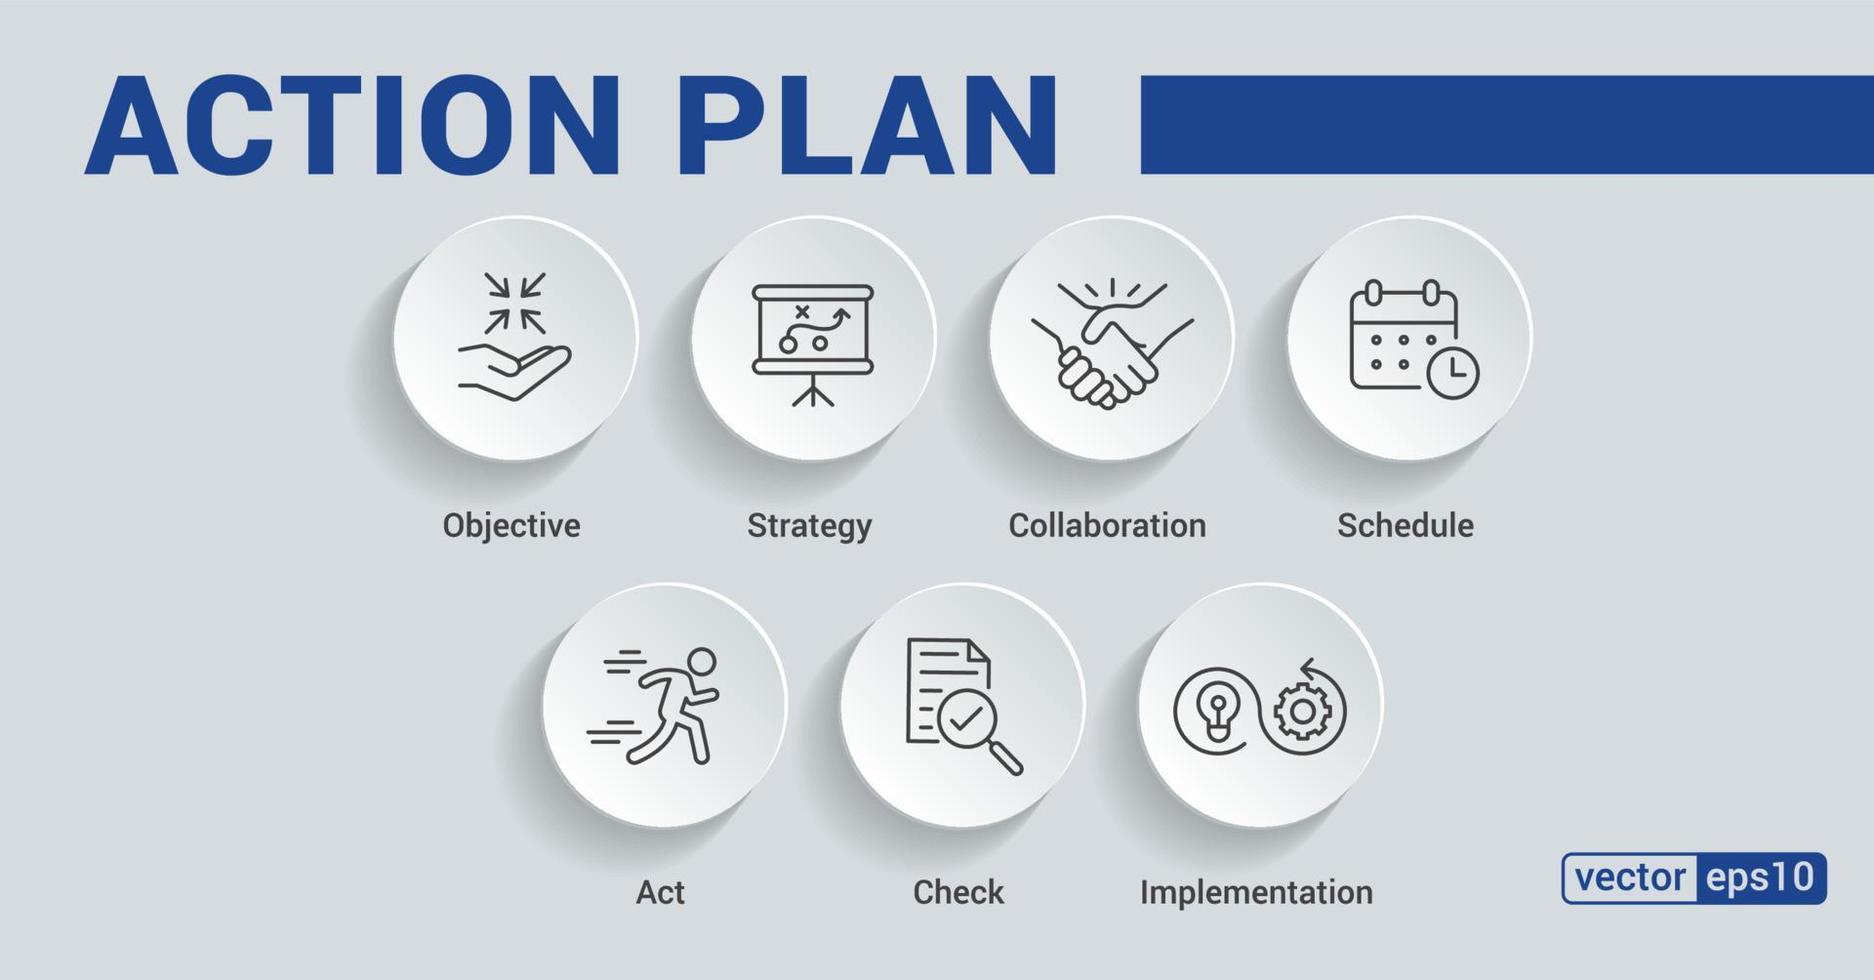 Action plan banner web icon for business and marketing. objective, strategy, Collaboration, Schedule, Plan and implementation. Minimal vector infographic. EPS 10.